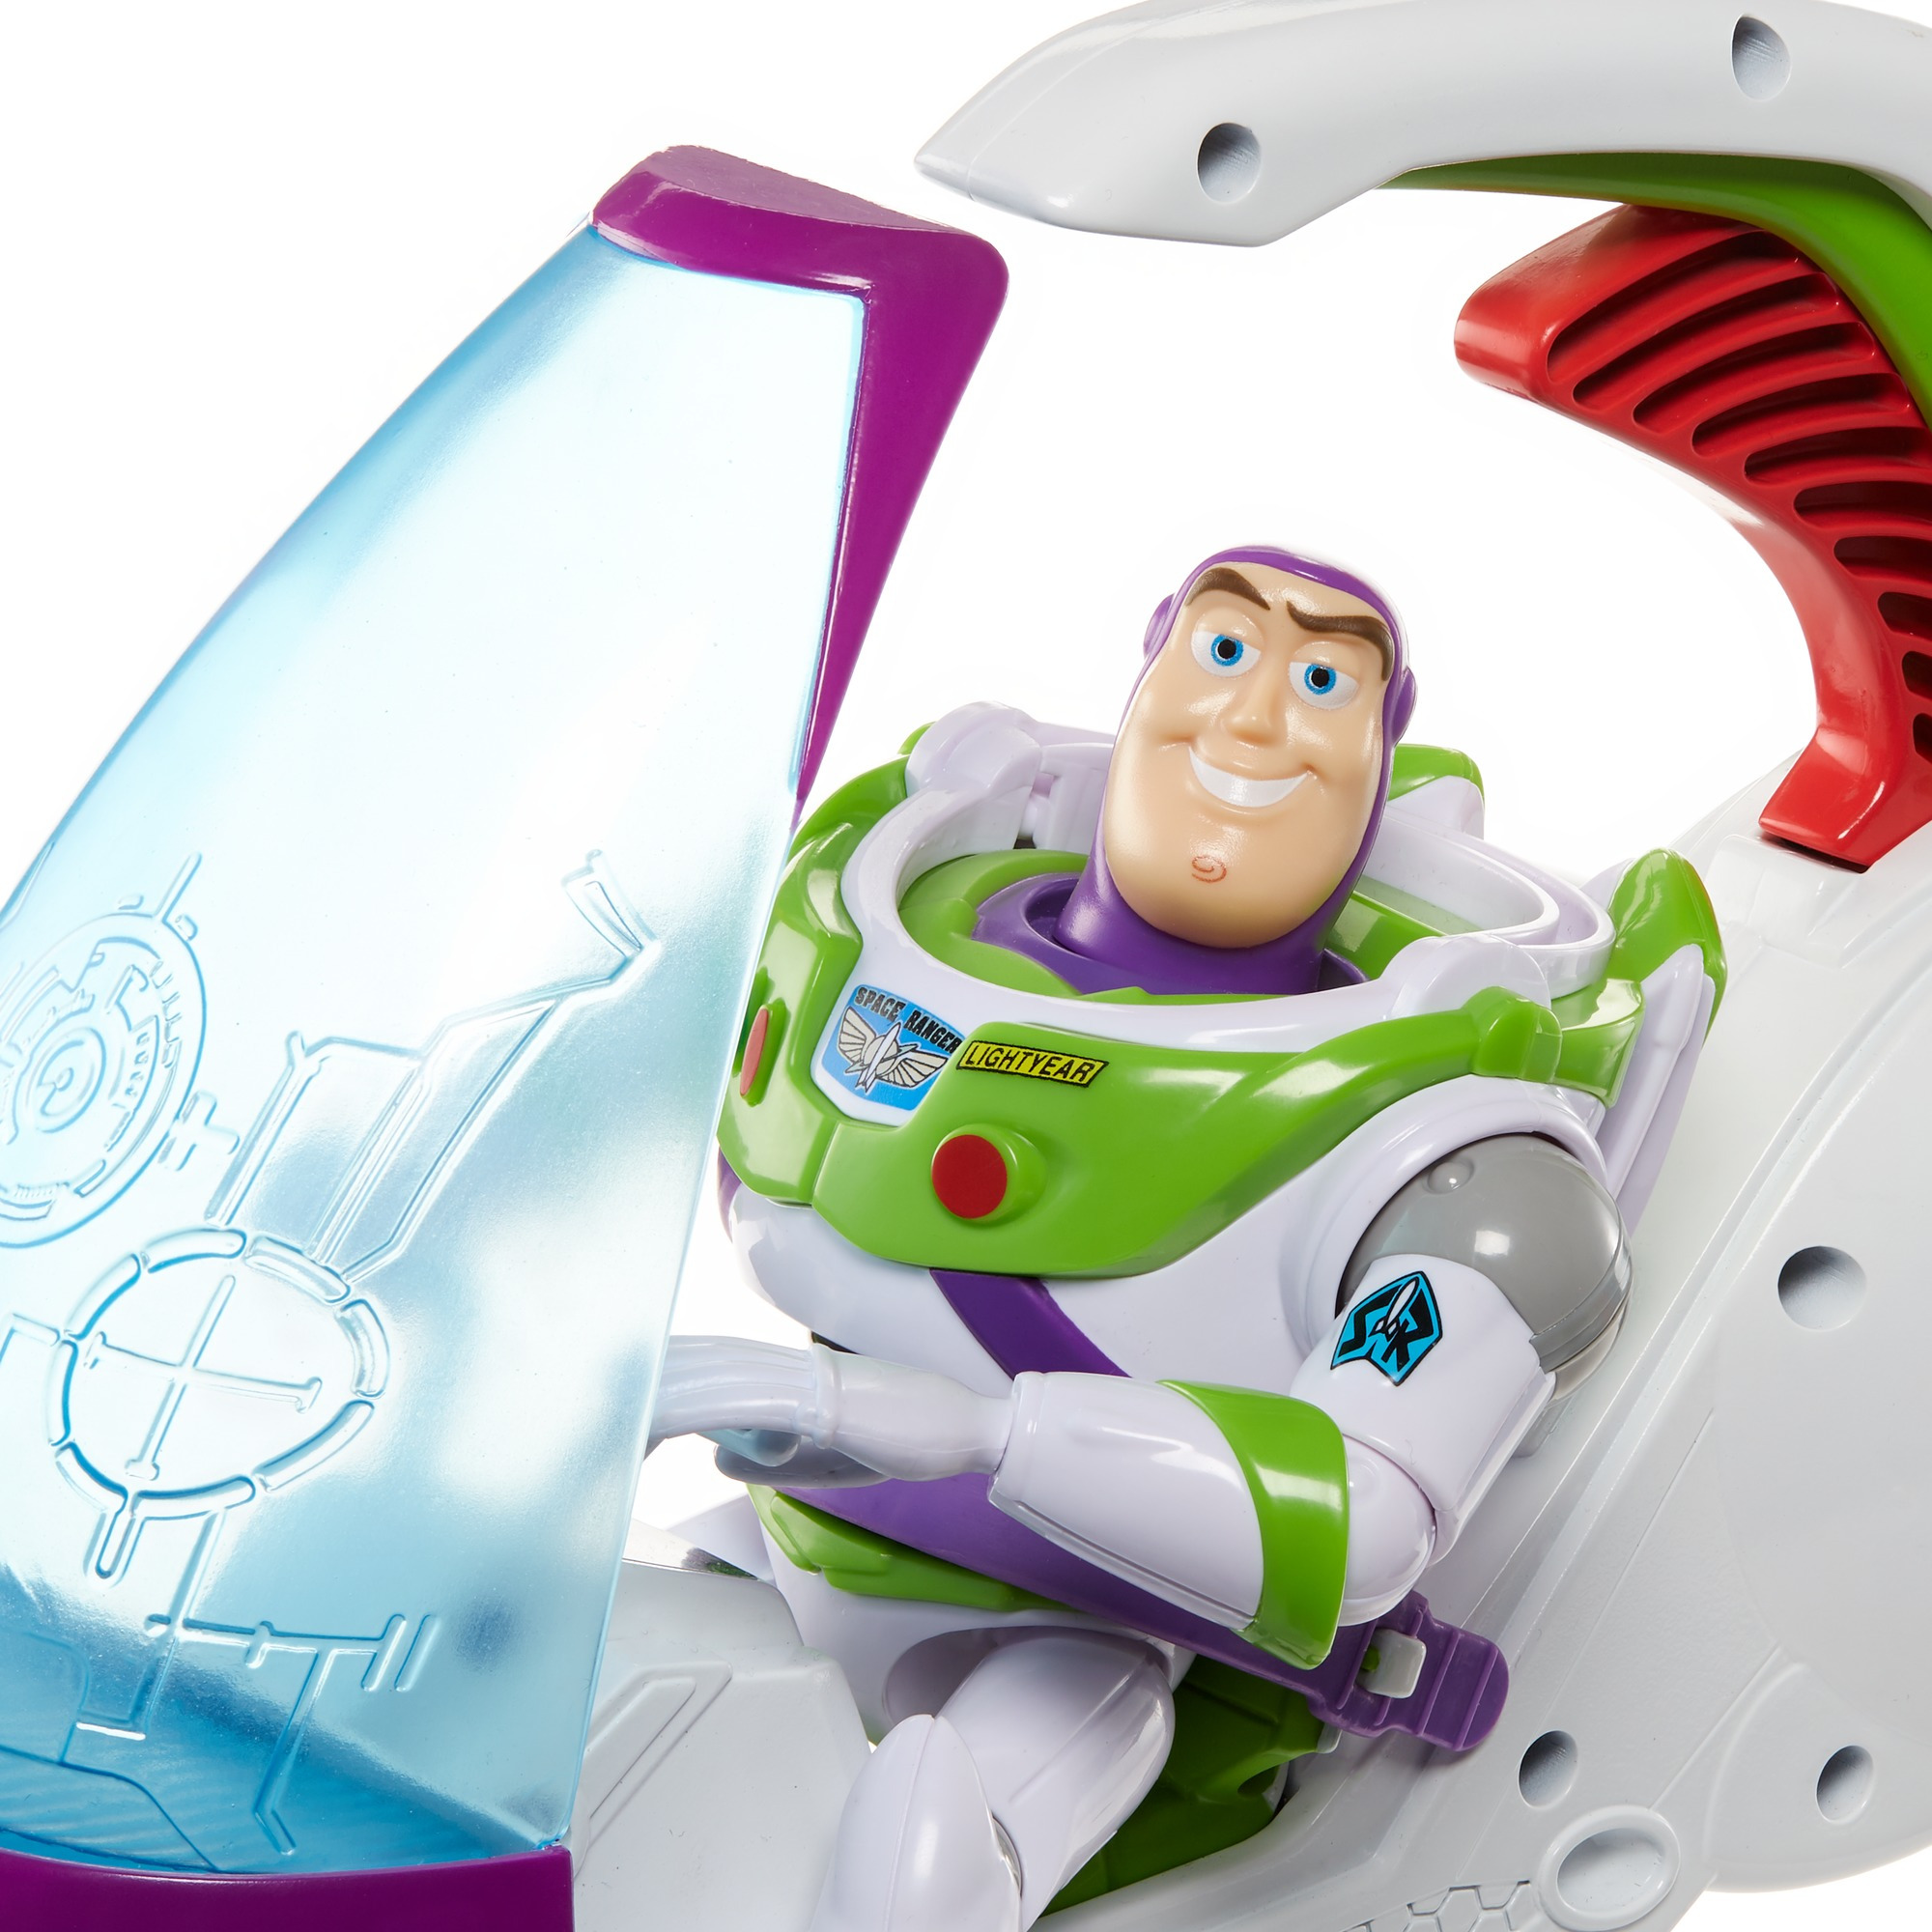 Disney Pixar Toy Story Galaxy Explorer Spacecraft Toy Vehicle For 4 Year Olds & Up - image 4 of 6